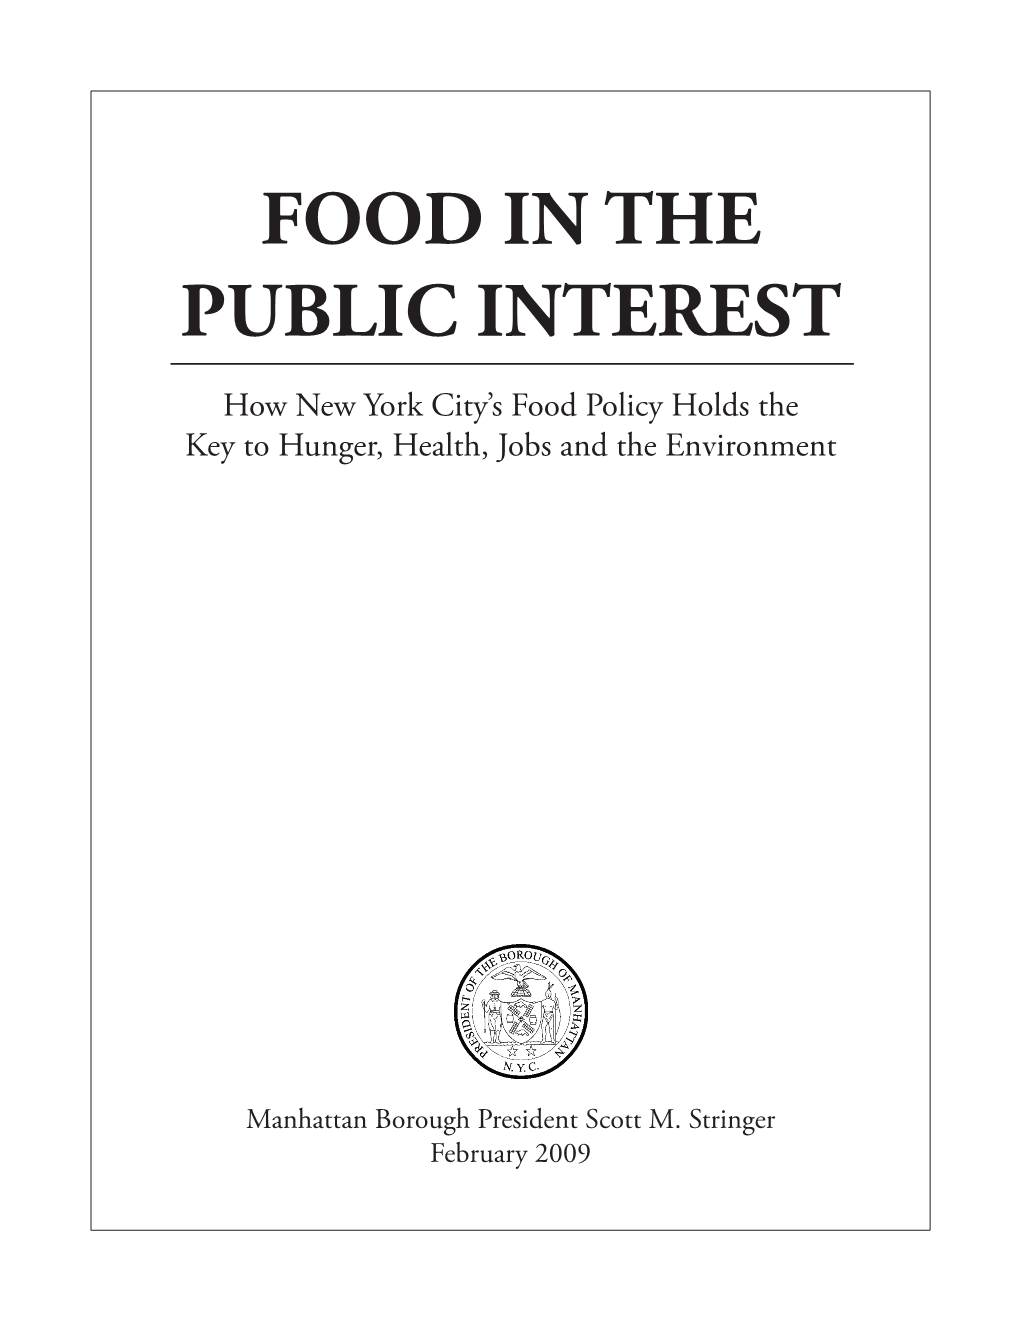 Food in the Public Interest